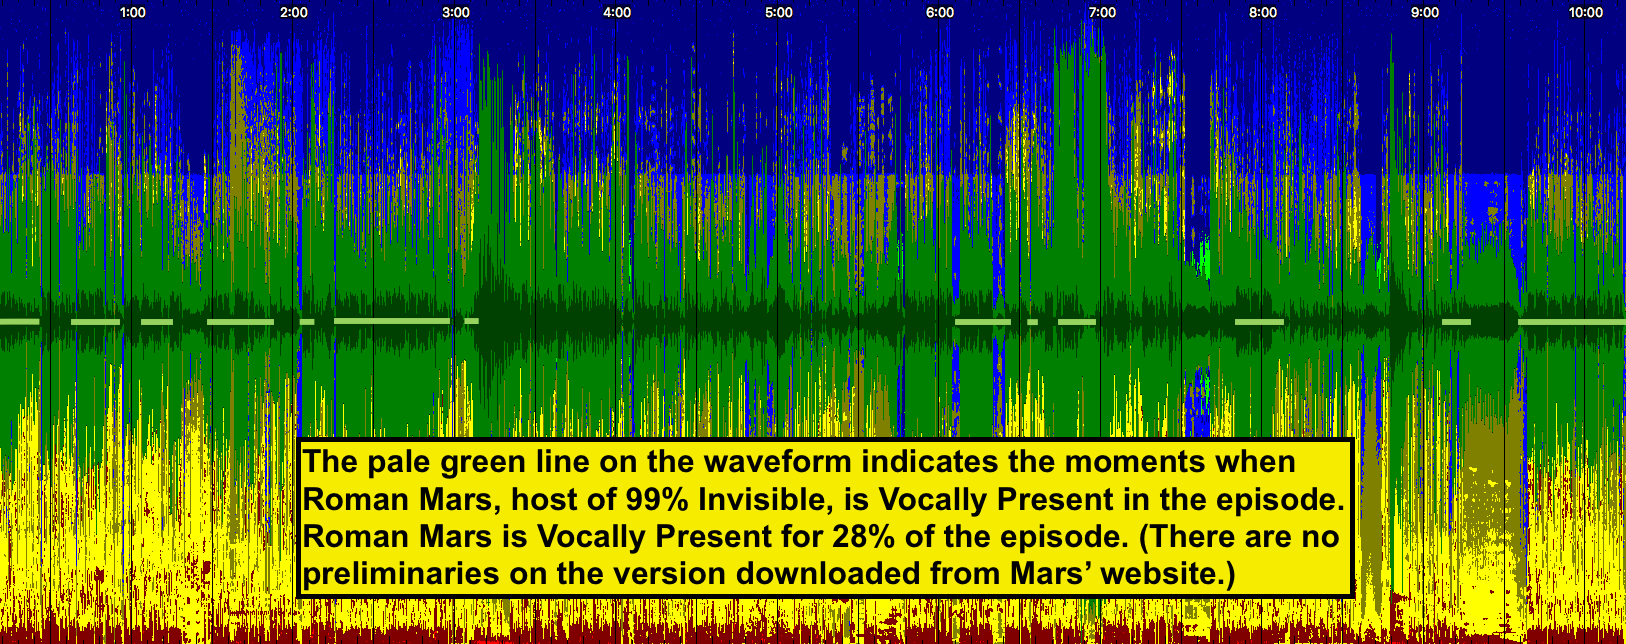 Sonic Visualization of the episode All in Your Head. The visual is a spectrogram of the sound of the episode in yellow and blue, layered with a waveform of the audio in green. Superimposed is a pale green line on the waveform to indicate when Roman Mars is speaking during the episode. The text reads: The pale green line on the waveform indicates the moments when Roman Mars, host of 99% Invisible, is Vocally Present in this episode. Roman Mars is Vocally Present for 28% of the episode. There are no preliminaries on the version downloaded from Mars' website